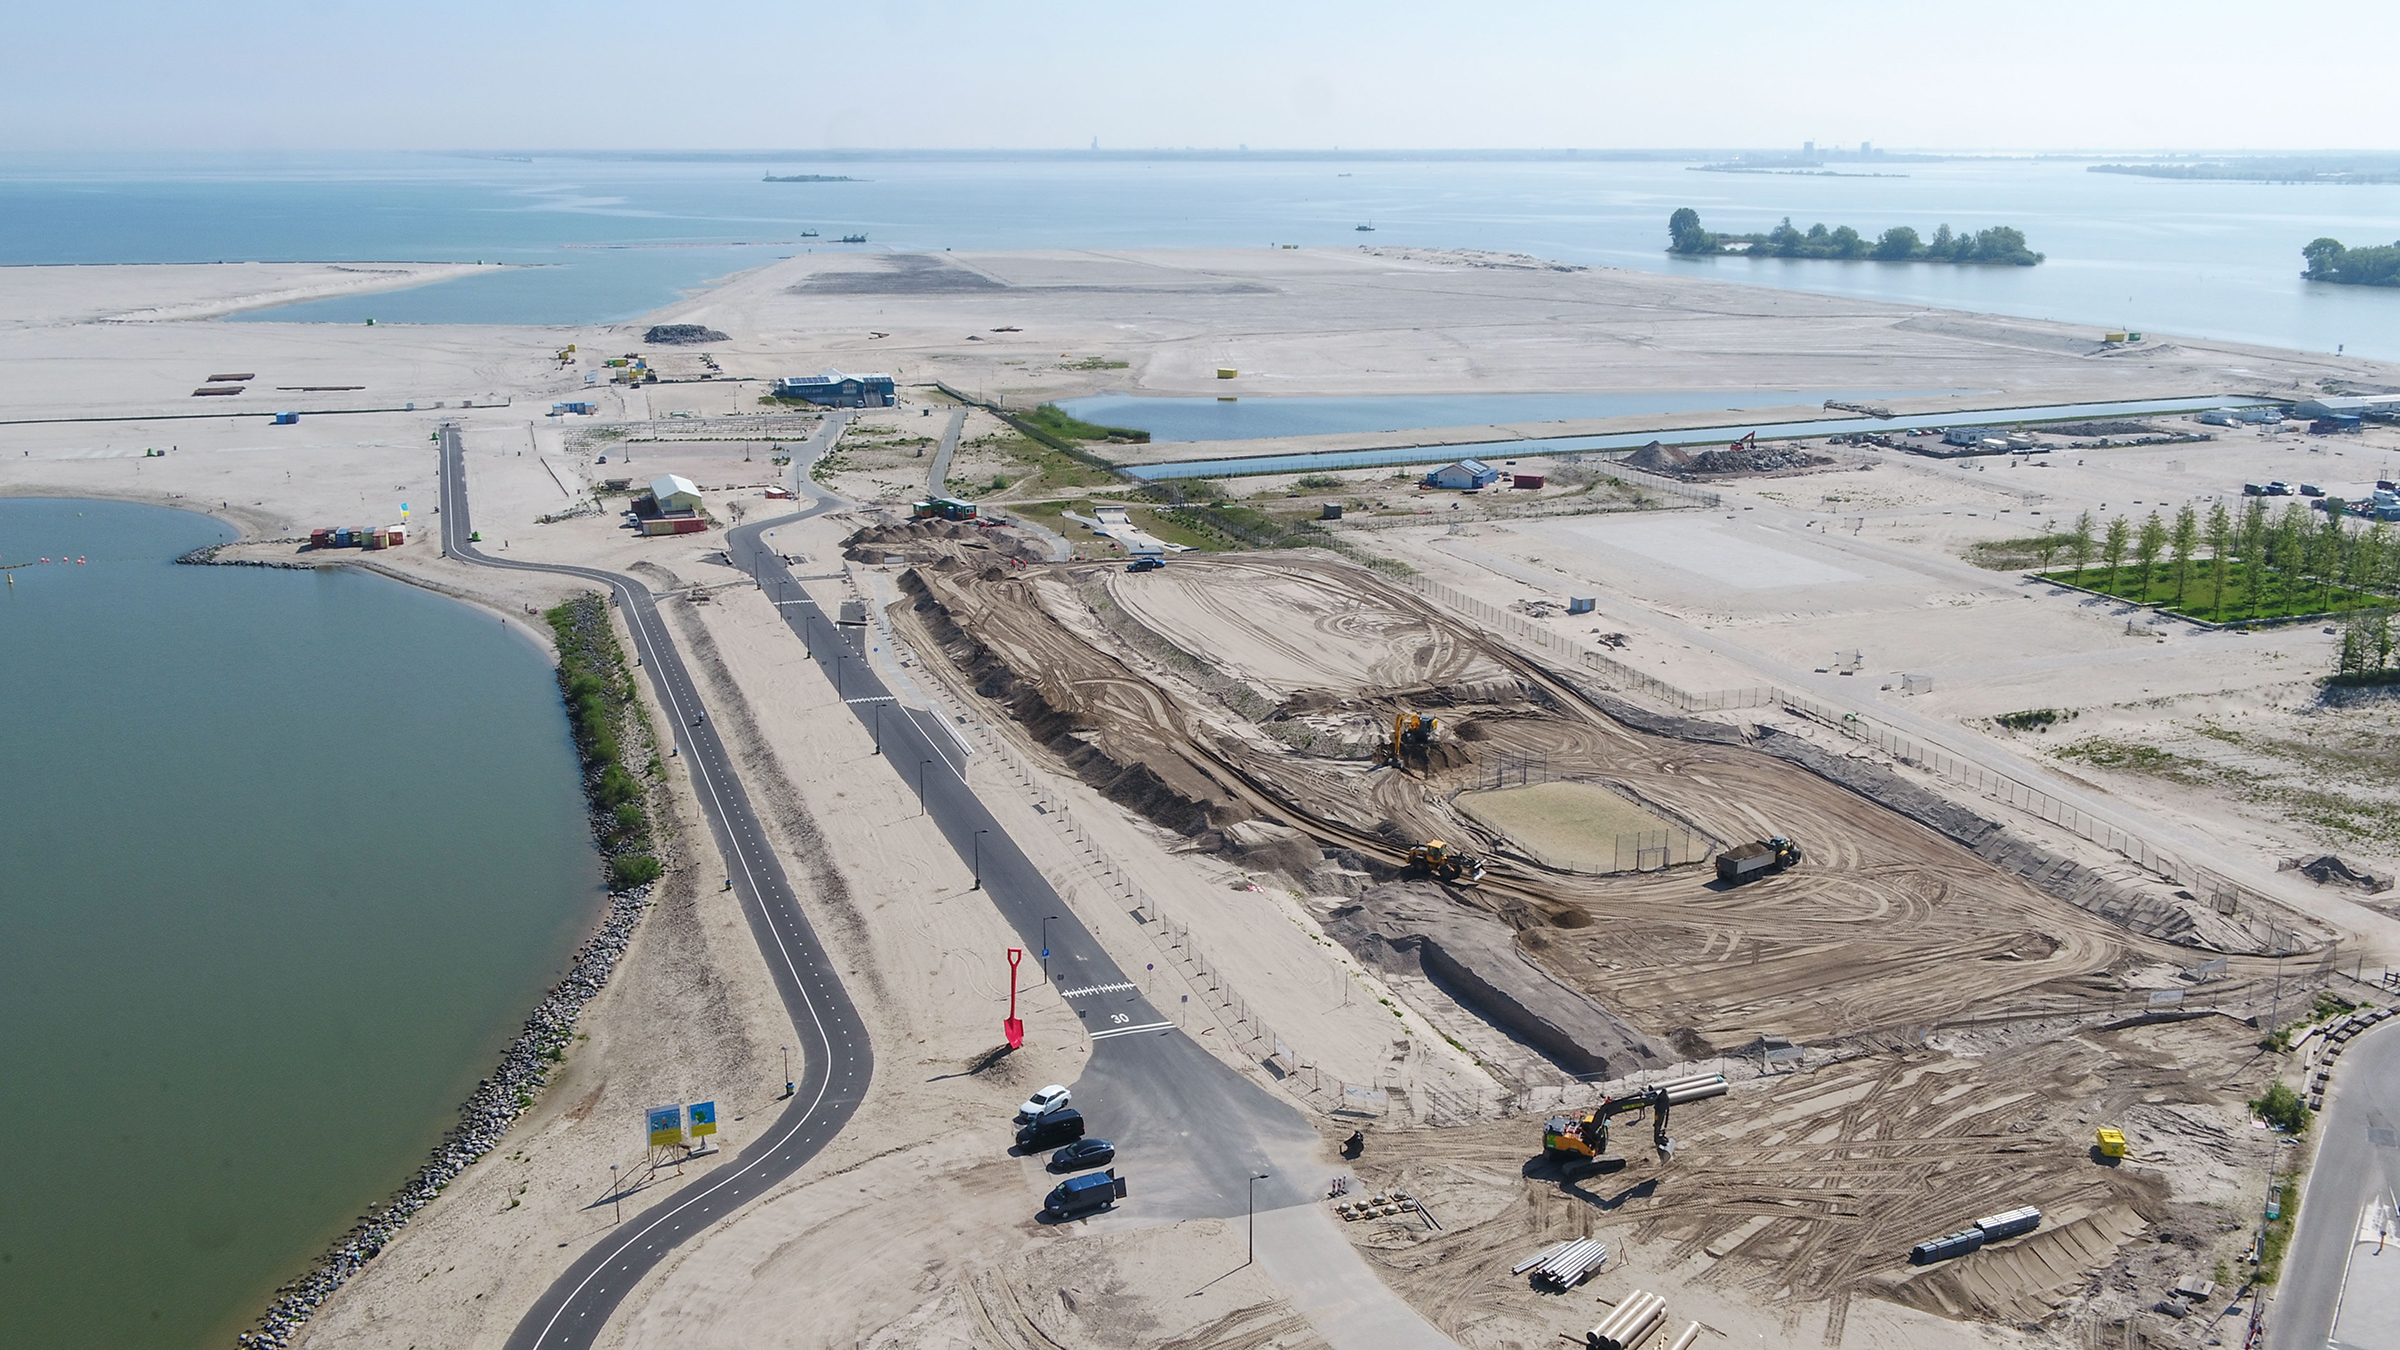 The city says the Beach Island development will prioritize balancing the needs of humans and nature (Gemeente Amsterdam)